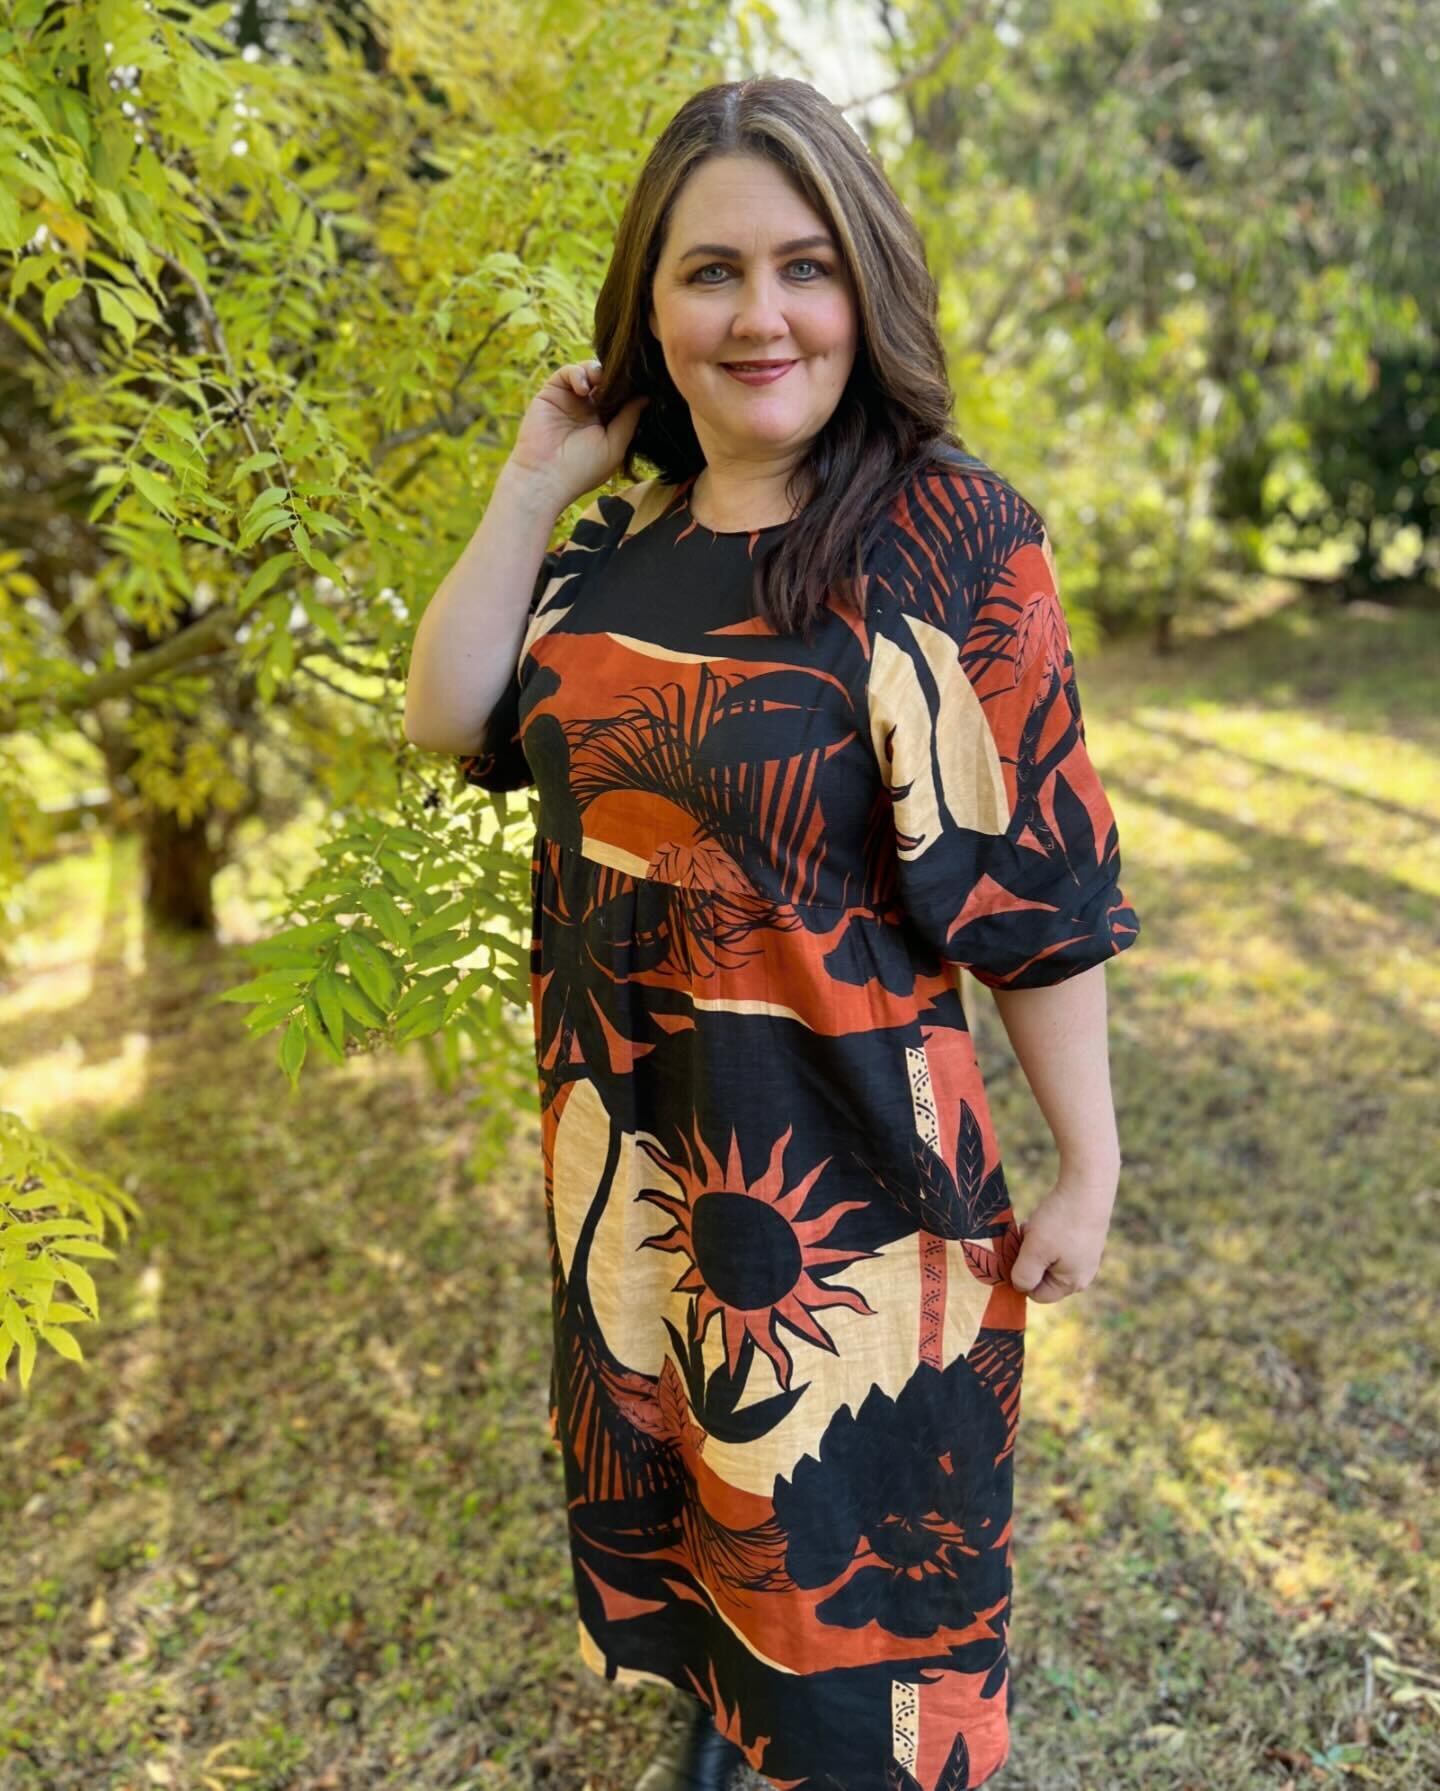 Did you know that the @stylearc #hopedress is one of the easiest and most fulfilling dress patterns you&rsquo;ll ever make? &thinsp;
&thinsp;
It&rsquo;s definitely on my list of favourite dress patterns for all year round and comes us beautifully in 